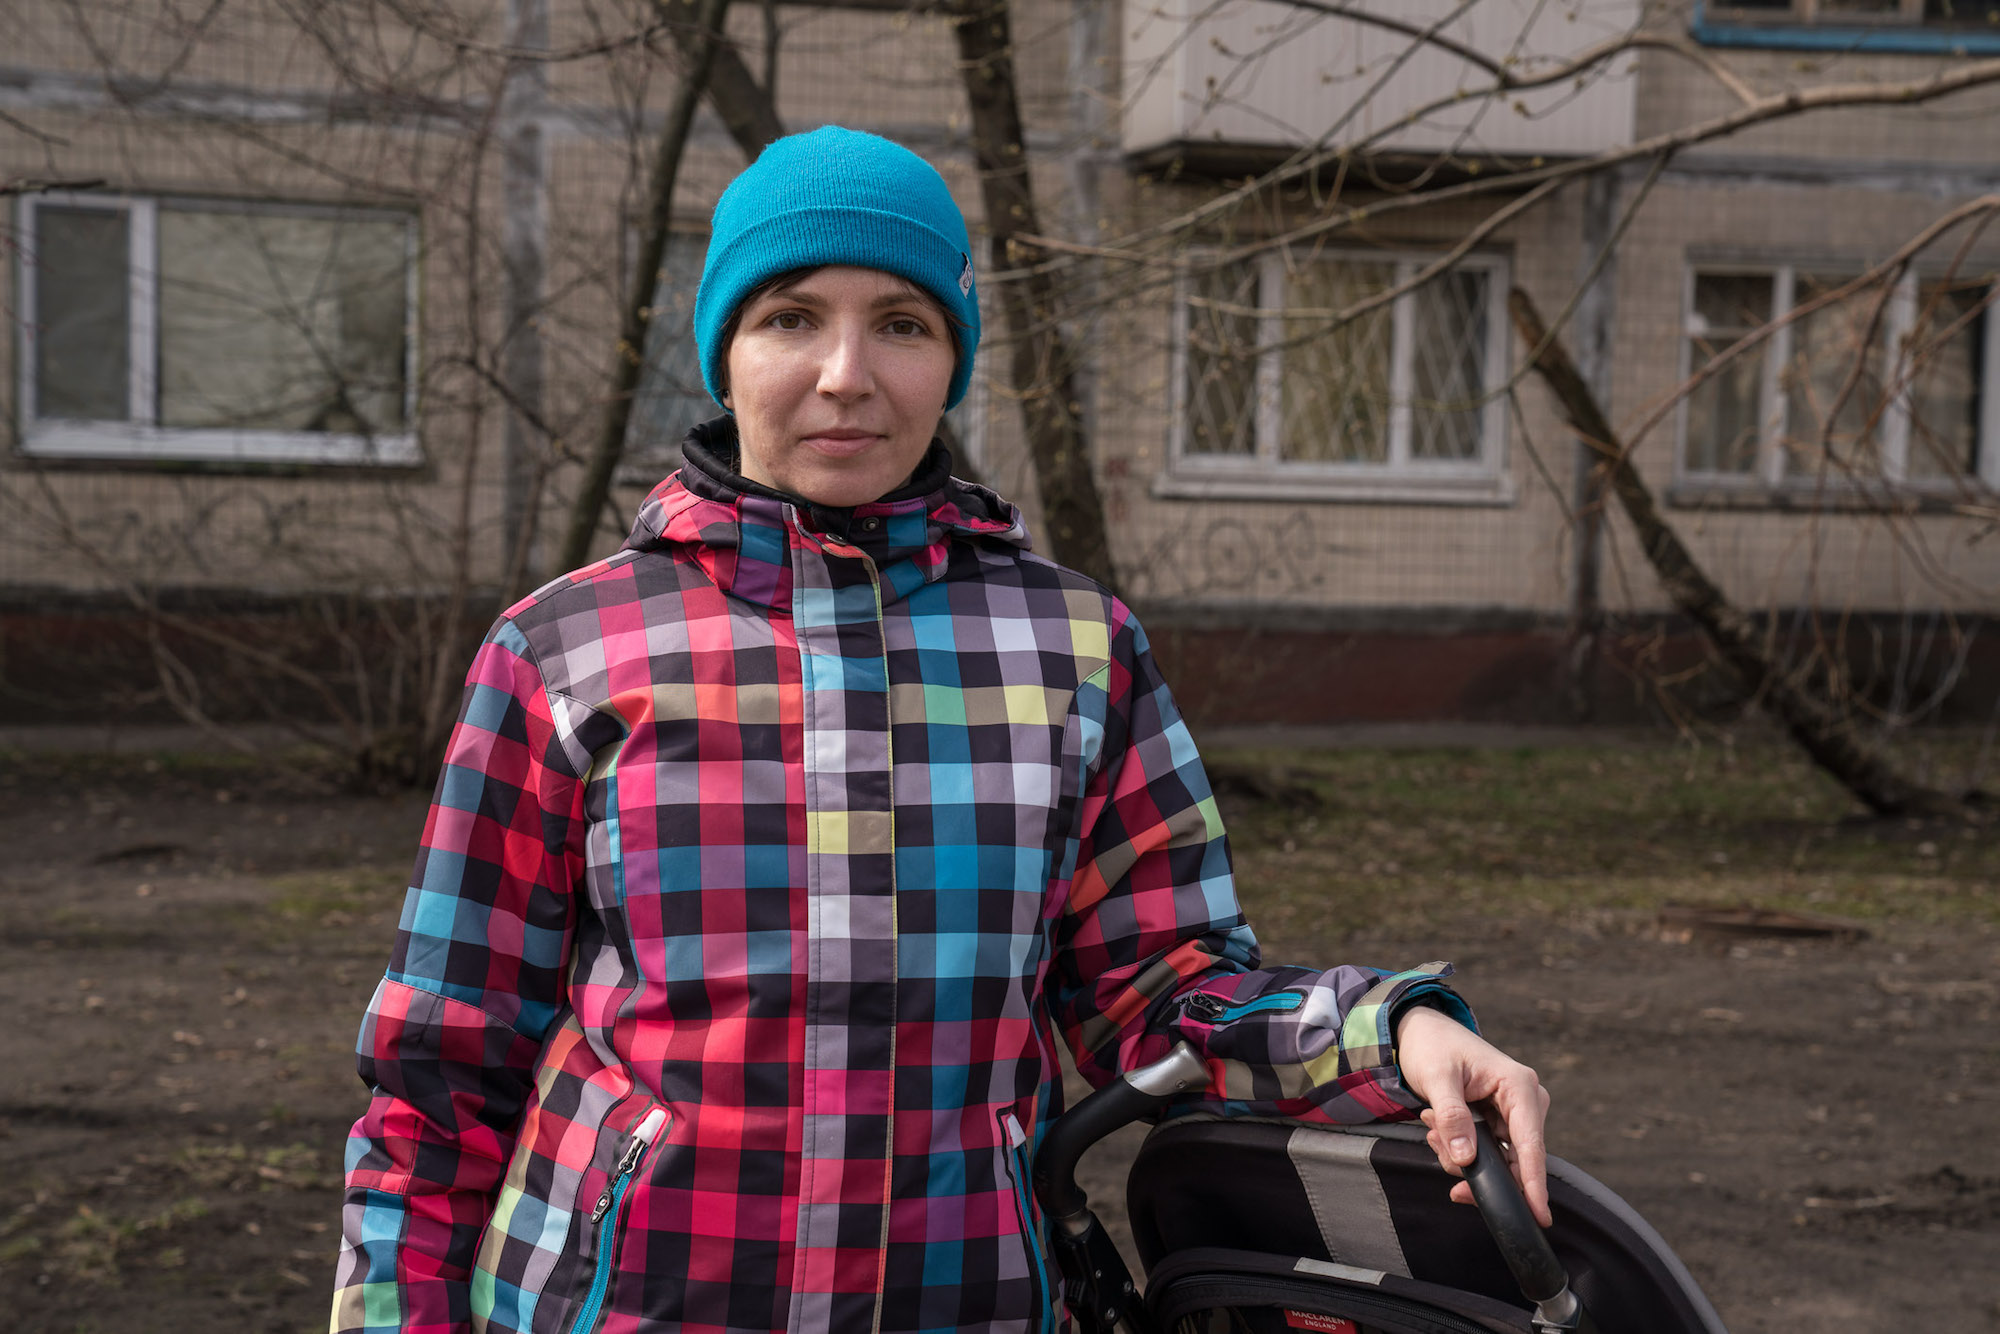 Leisia, 32, is a marketing manager who lives in a neighbouring Krushchevka with her husband and young son